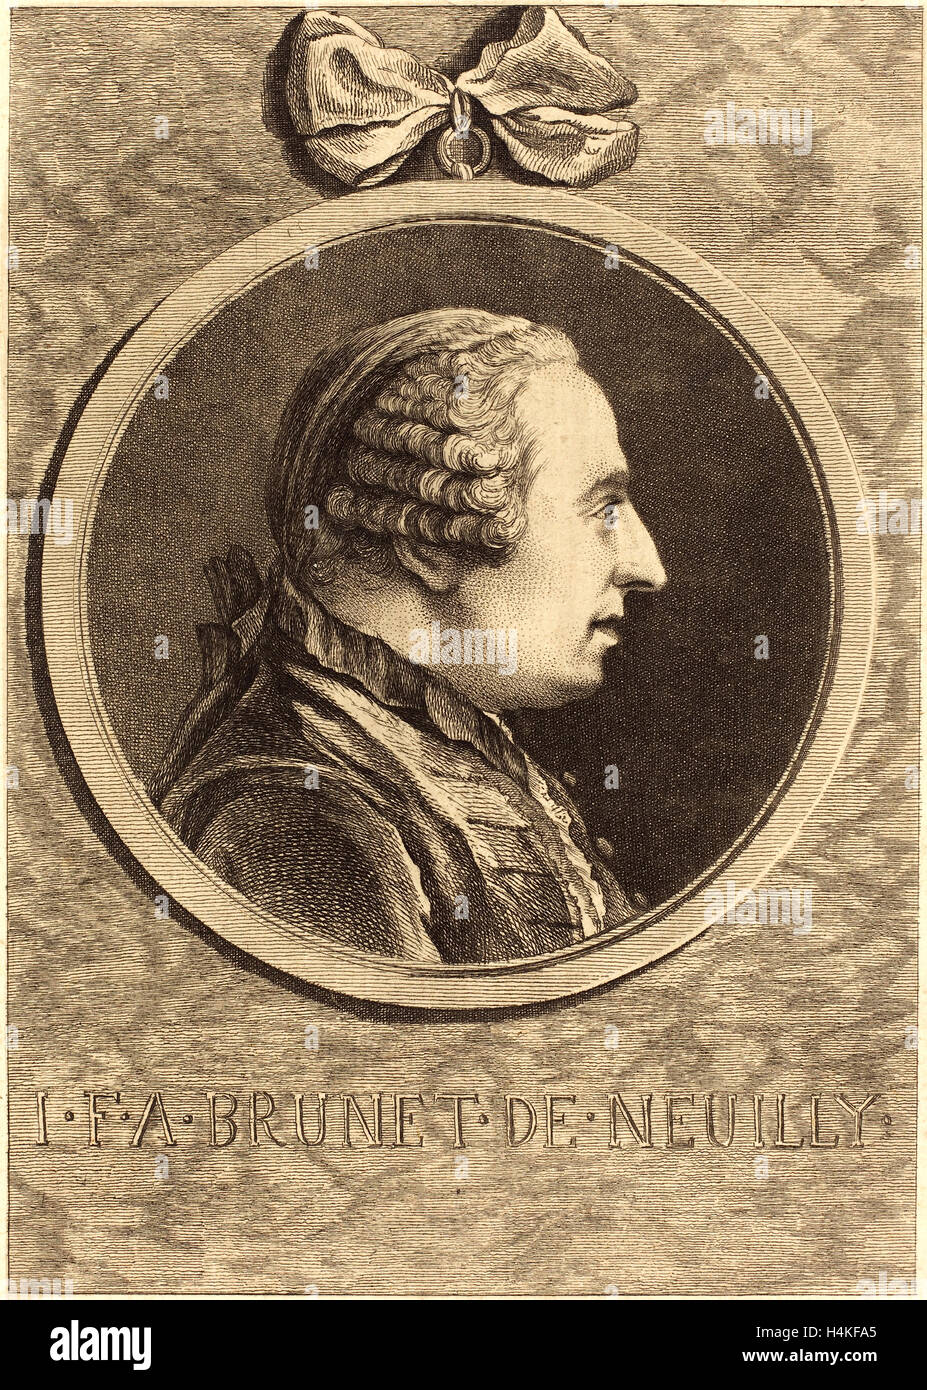 Charles-Nicolas Cochin II, French (1715-1790), I.F.A. Brunet de Neuilly, etching on laid paper Stock Photo